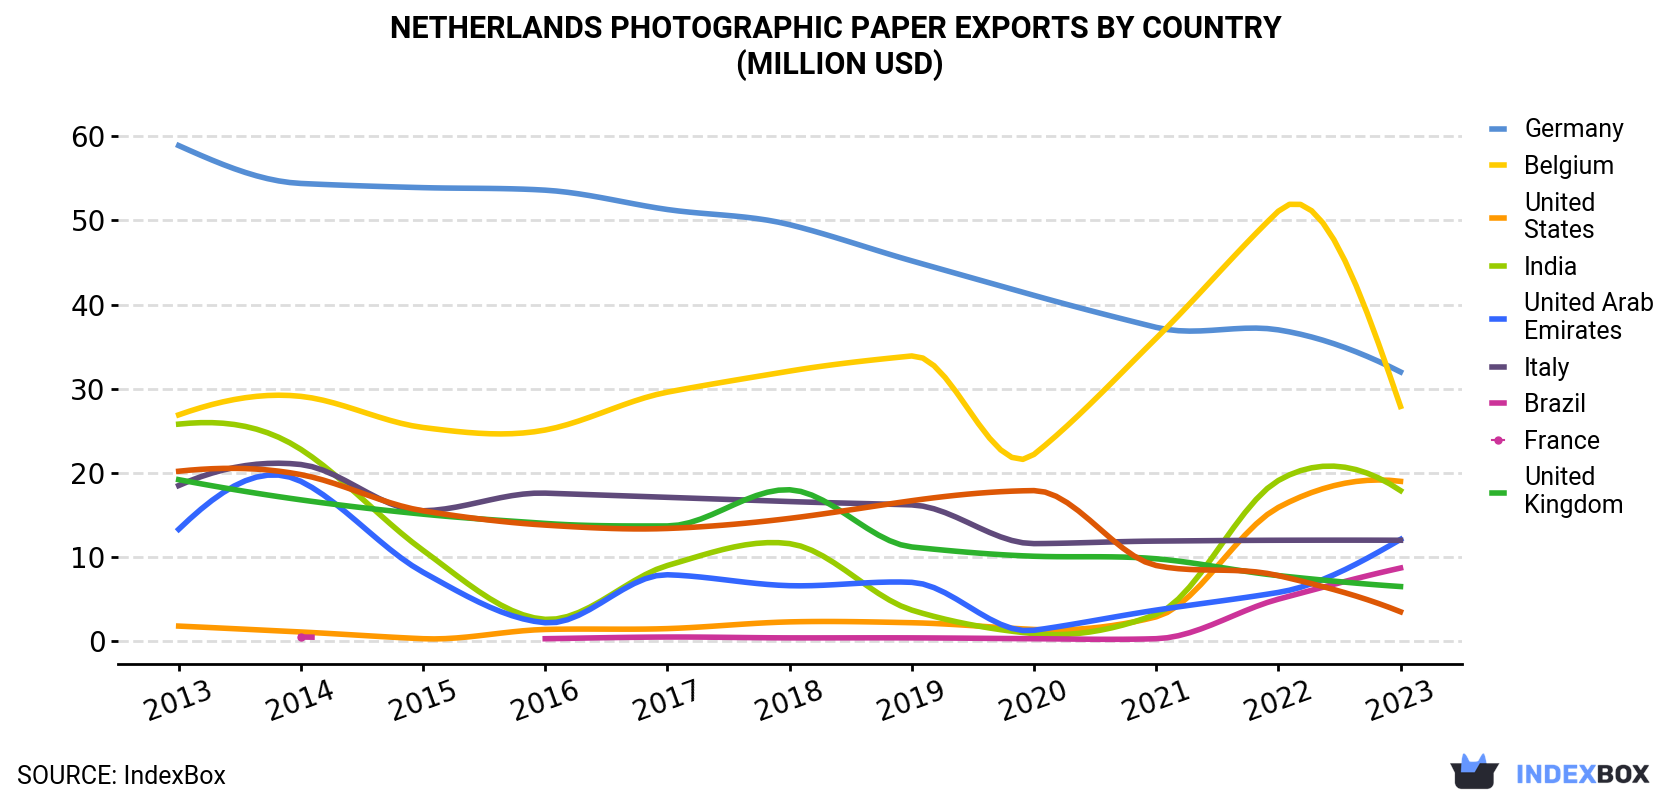 Netherlands Photographic Paper Exports By Country (Million USD)